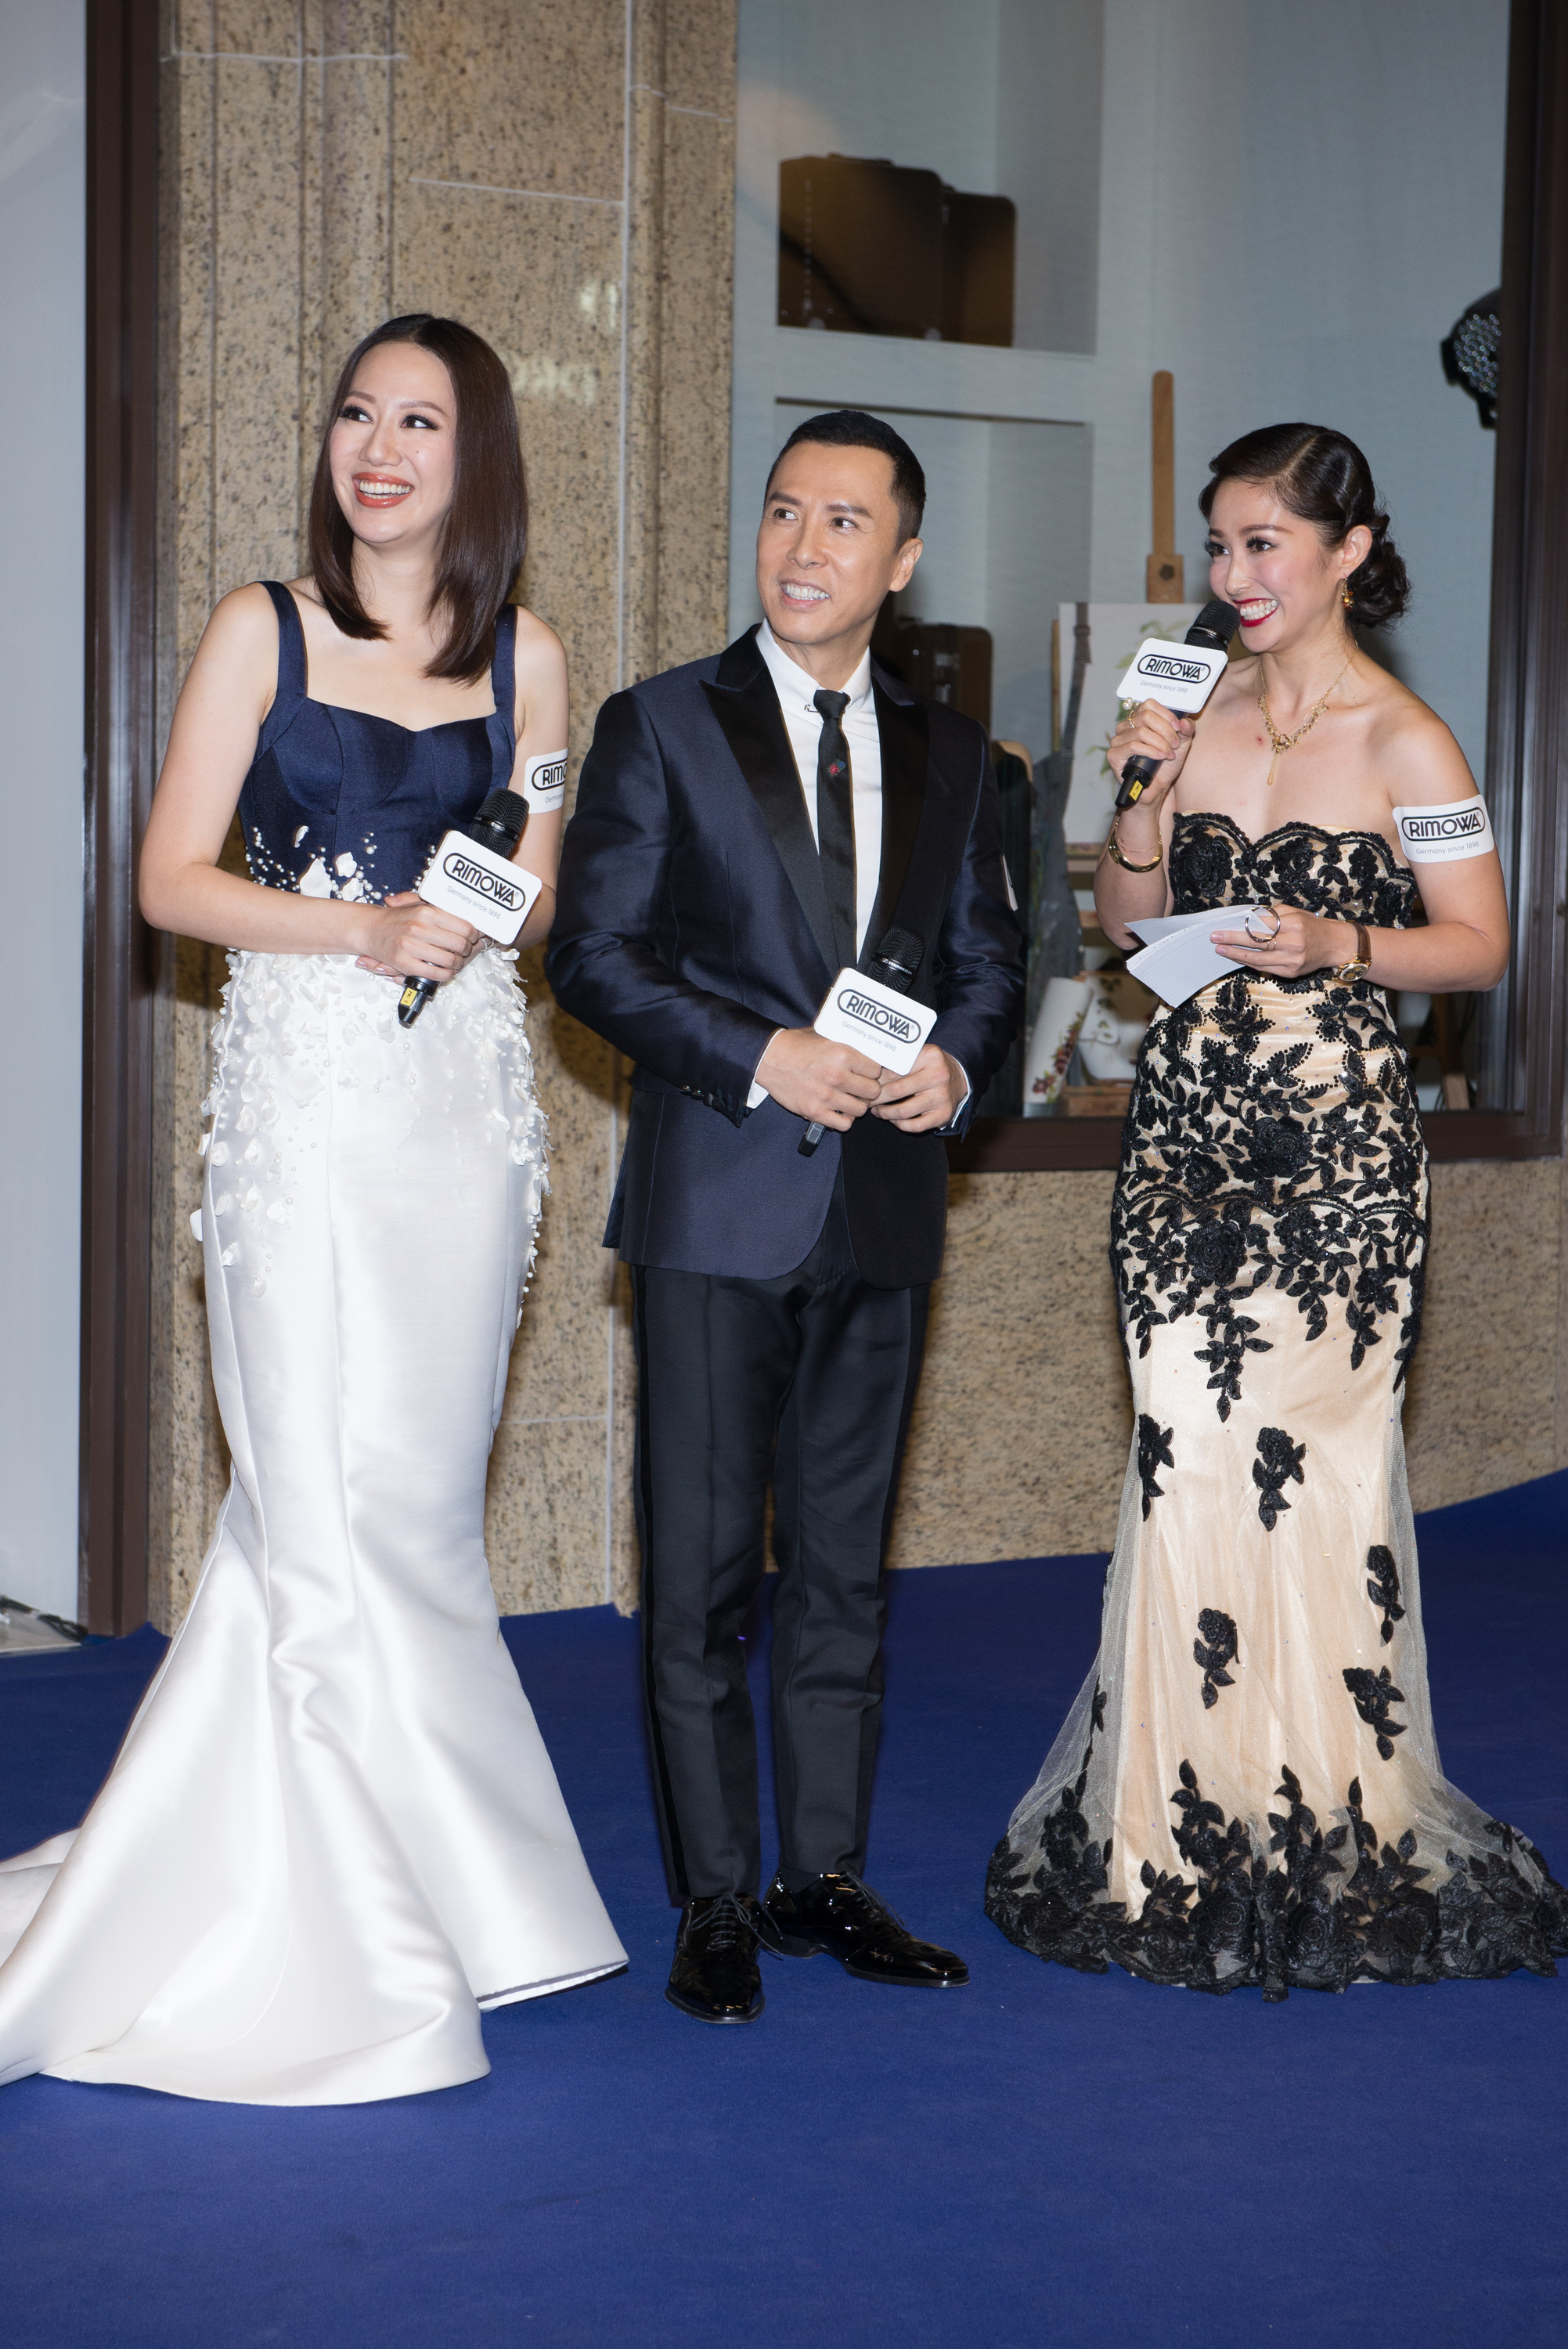 MC Rimova event chatting happily with Donnie Yen and Sissy Wong